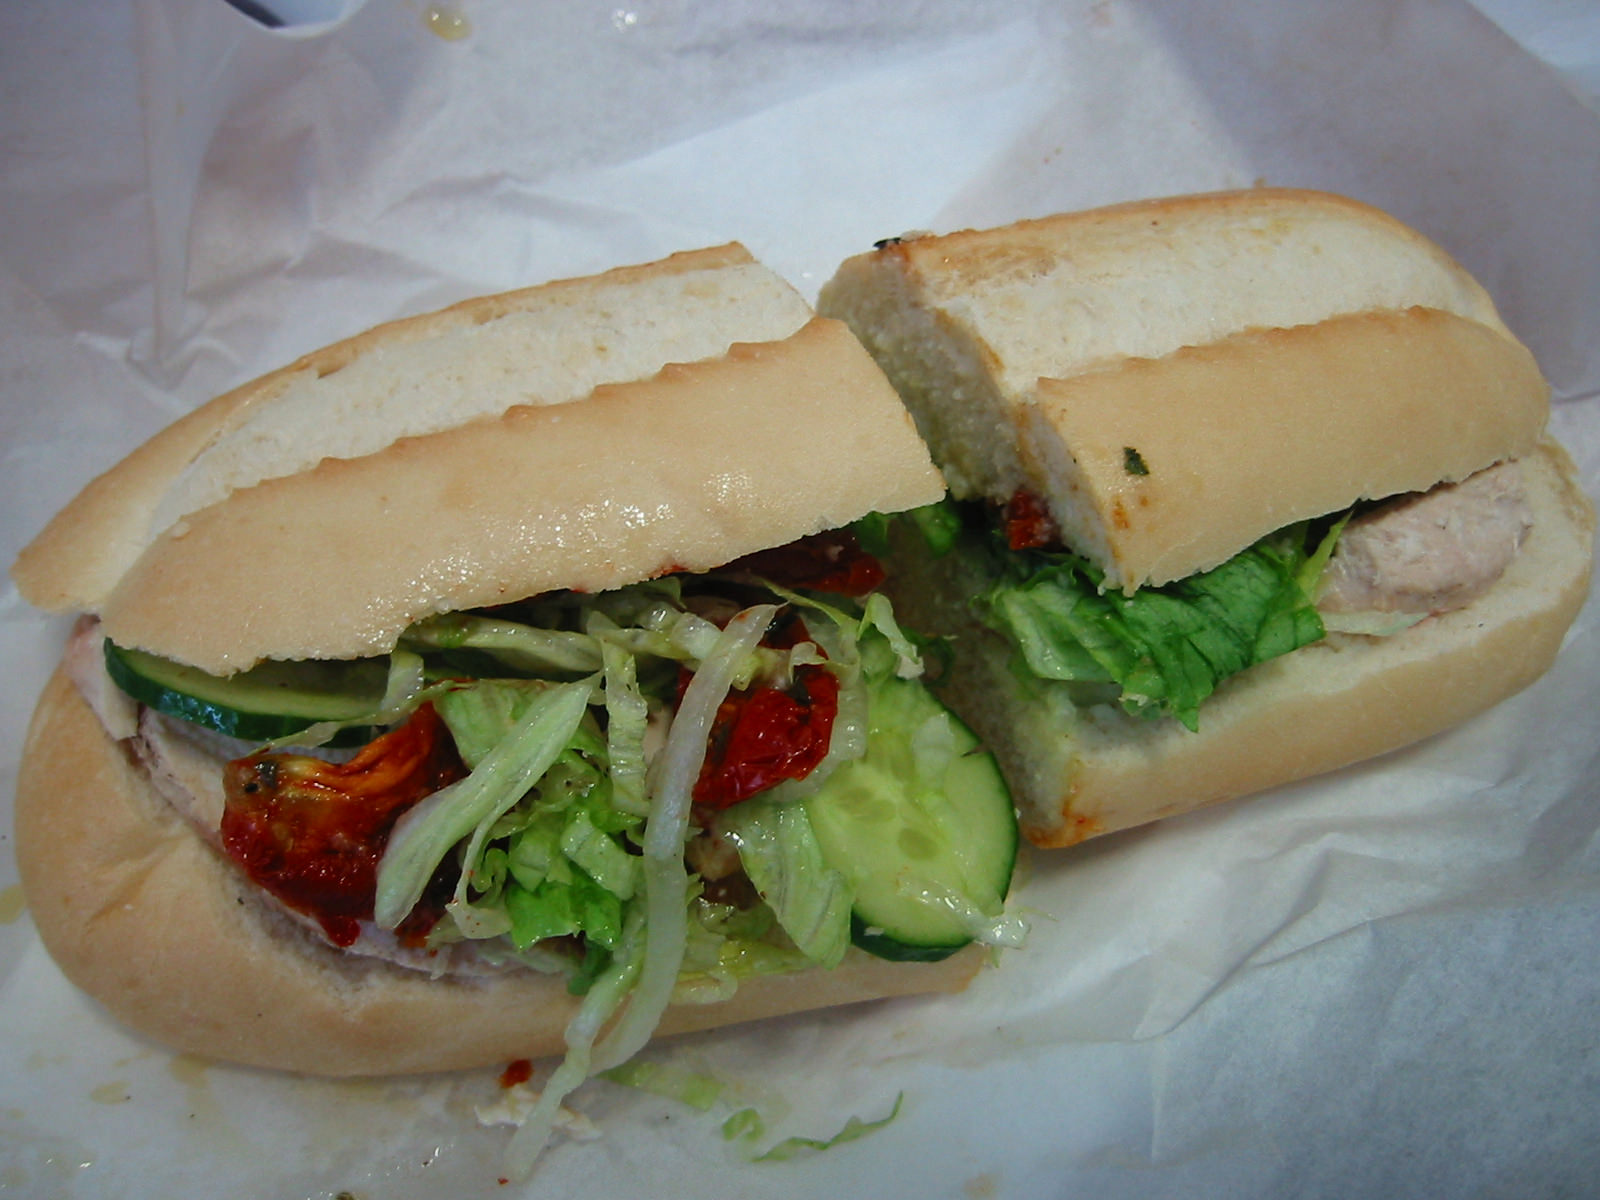 Bread roll with chicken, cucumber, lettuce and sundried tomatoes